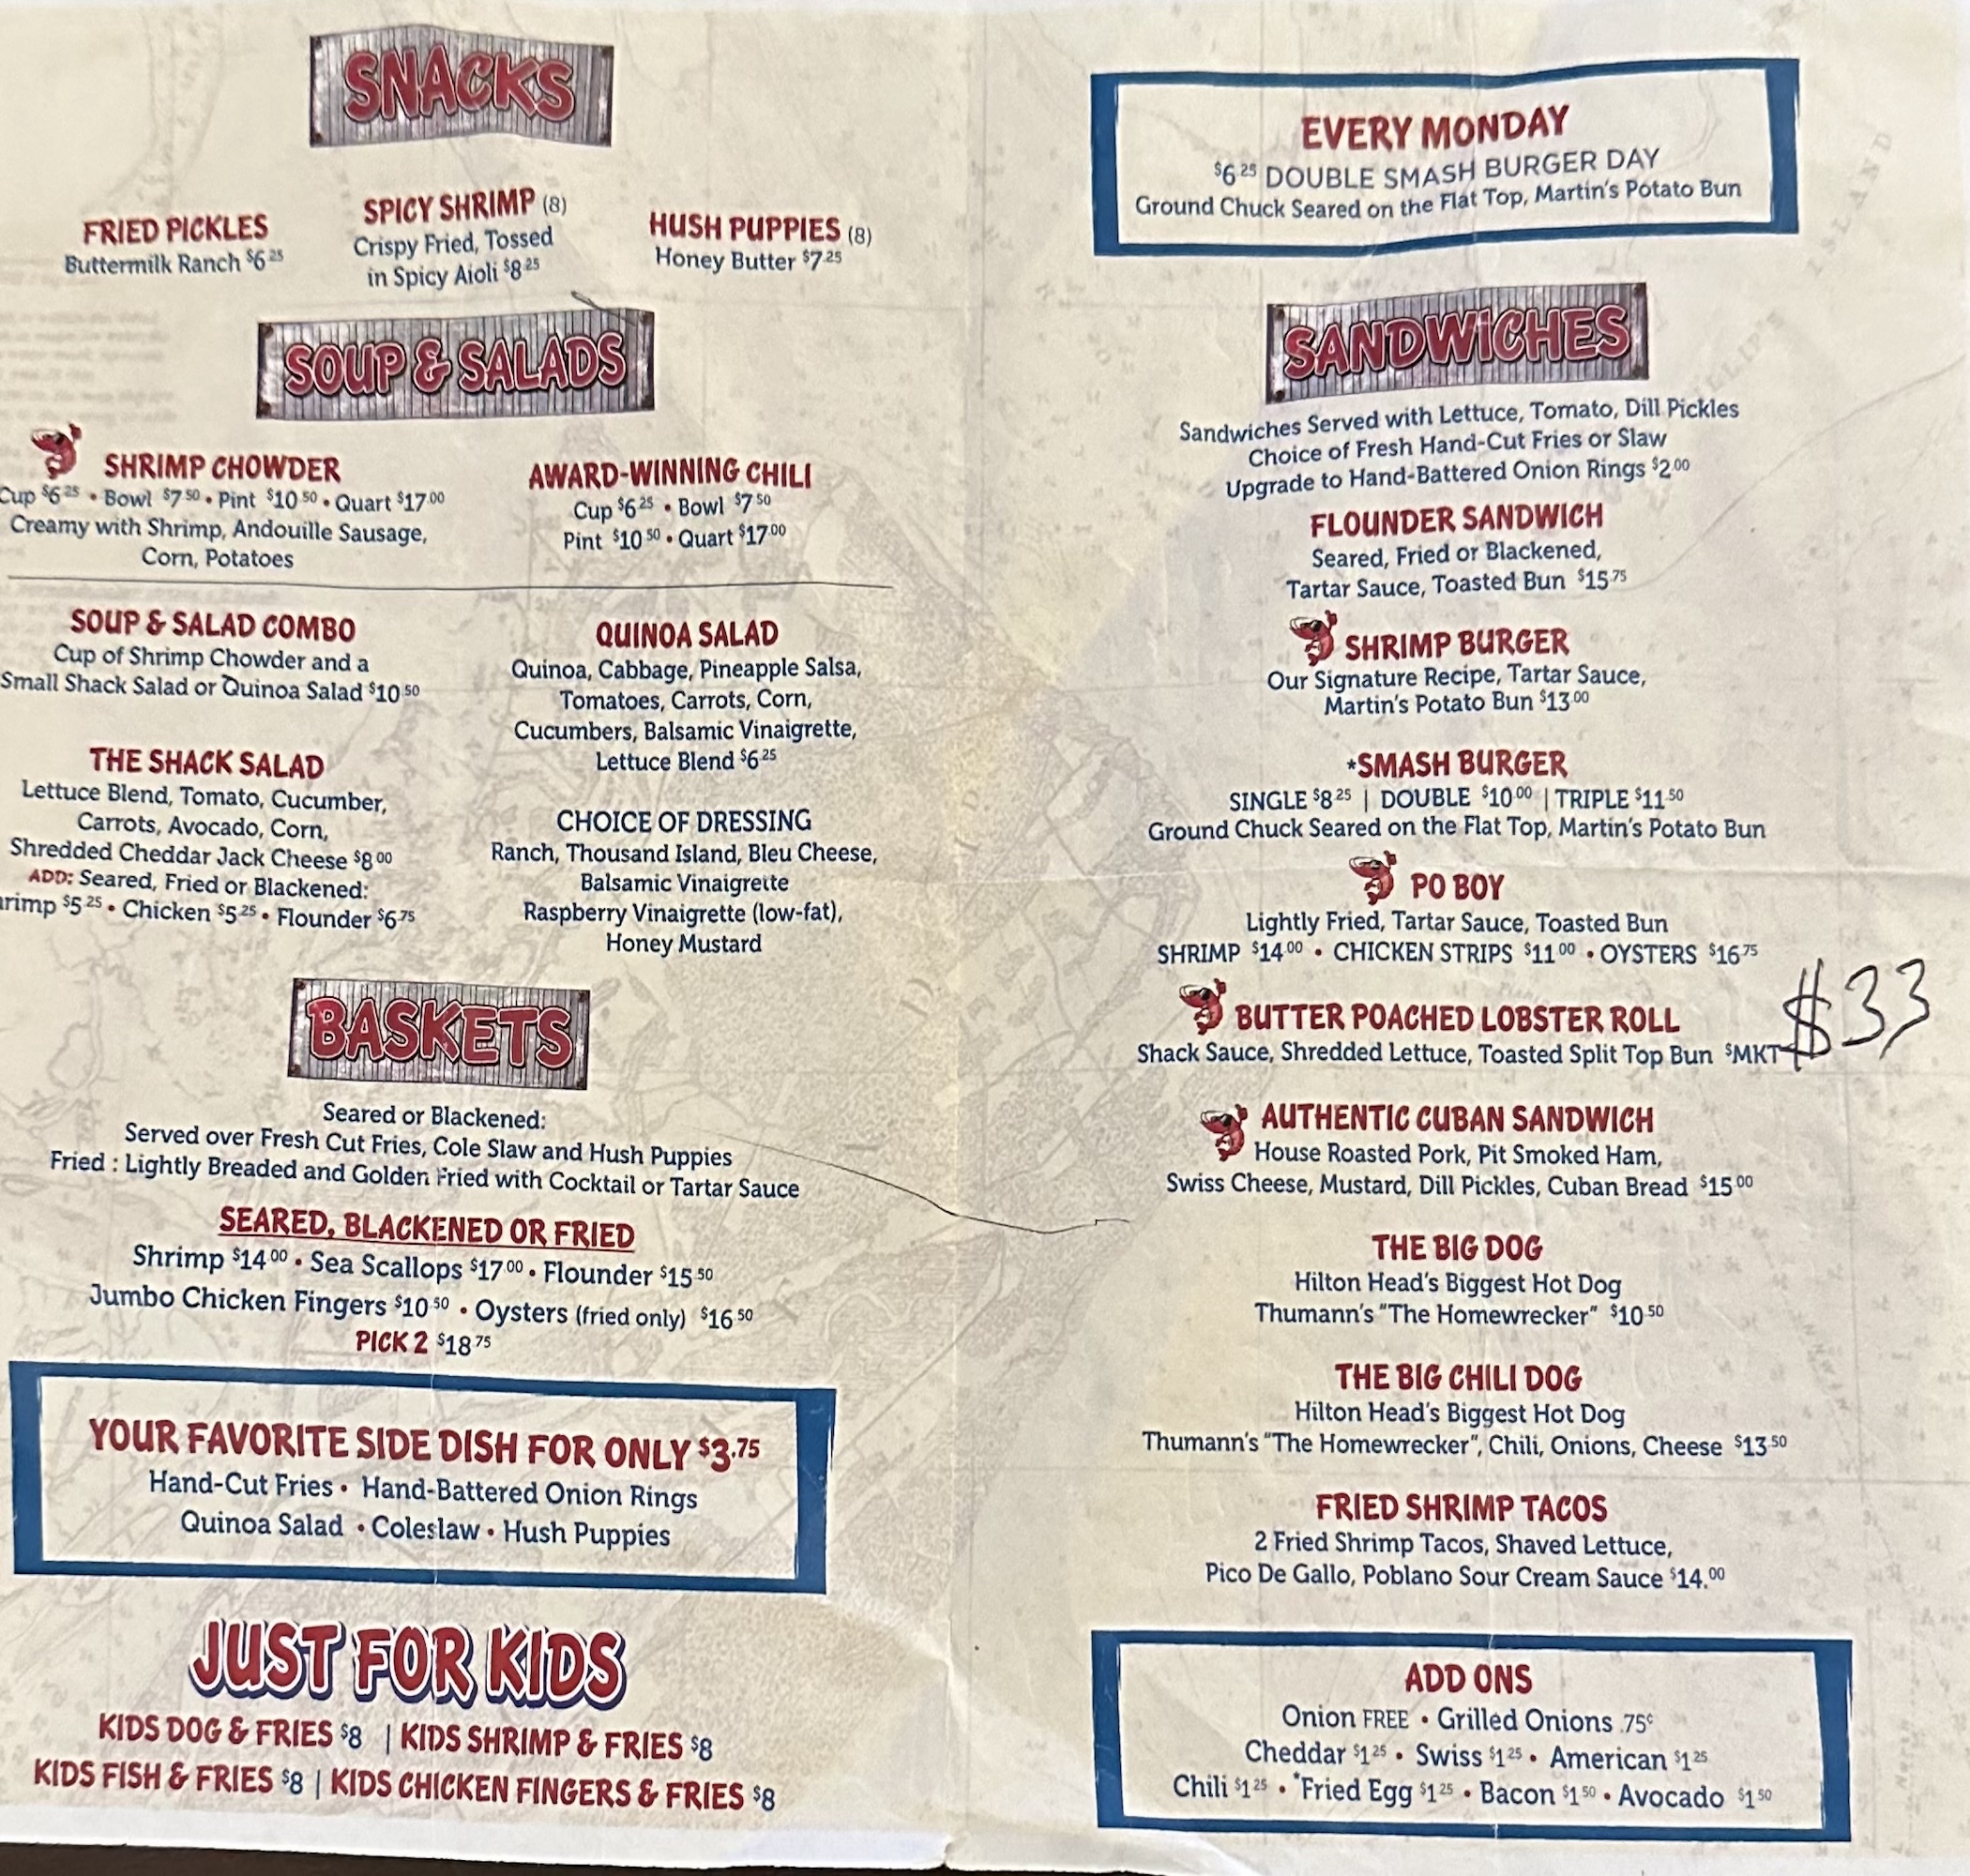 Restaurant Menu Food Delivery by Express Restaurant Delivery Hilton Head